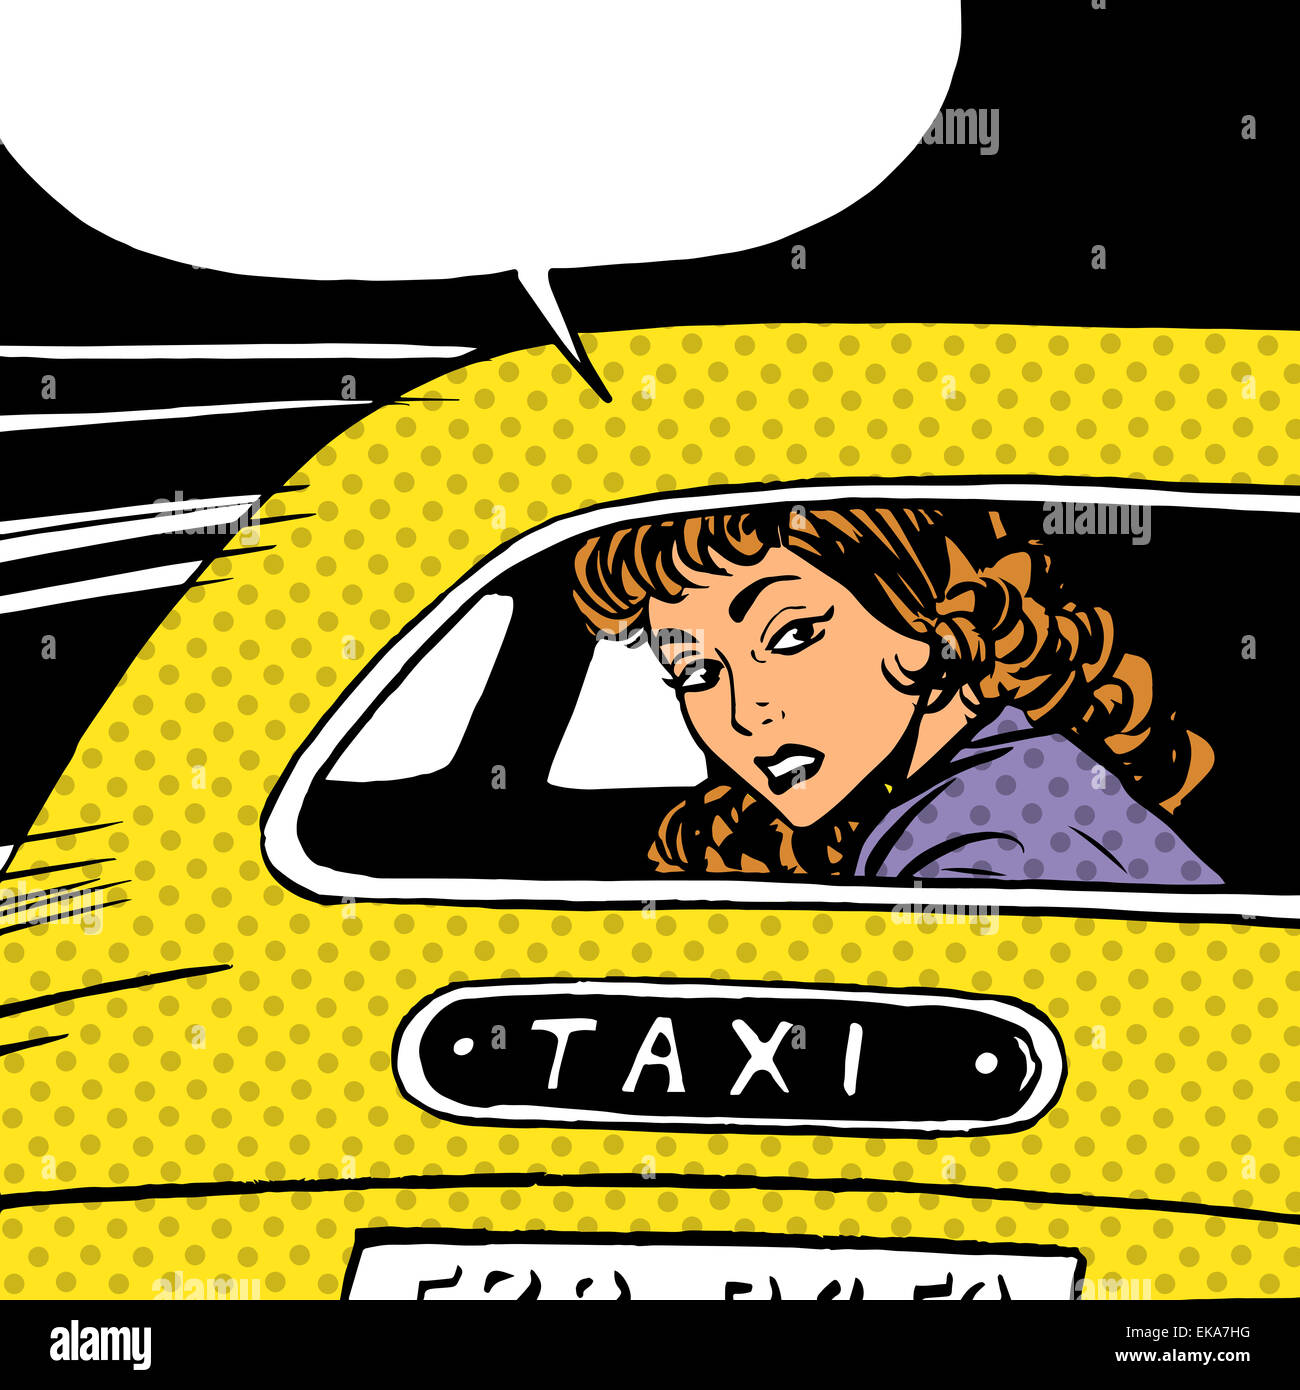 woman goes to taxi looks around separation anxiety love maniac p Stock Photo